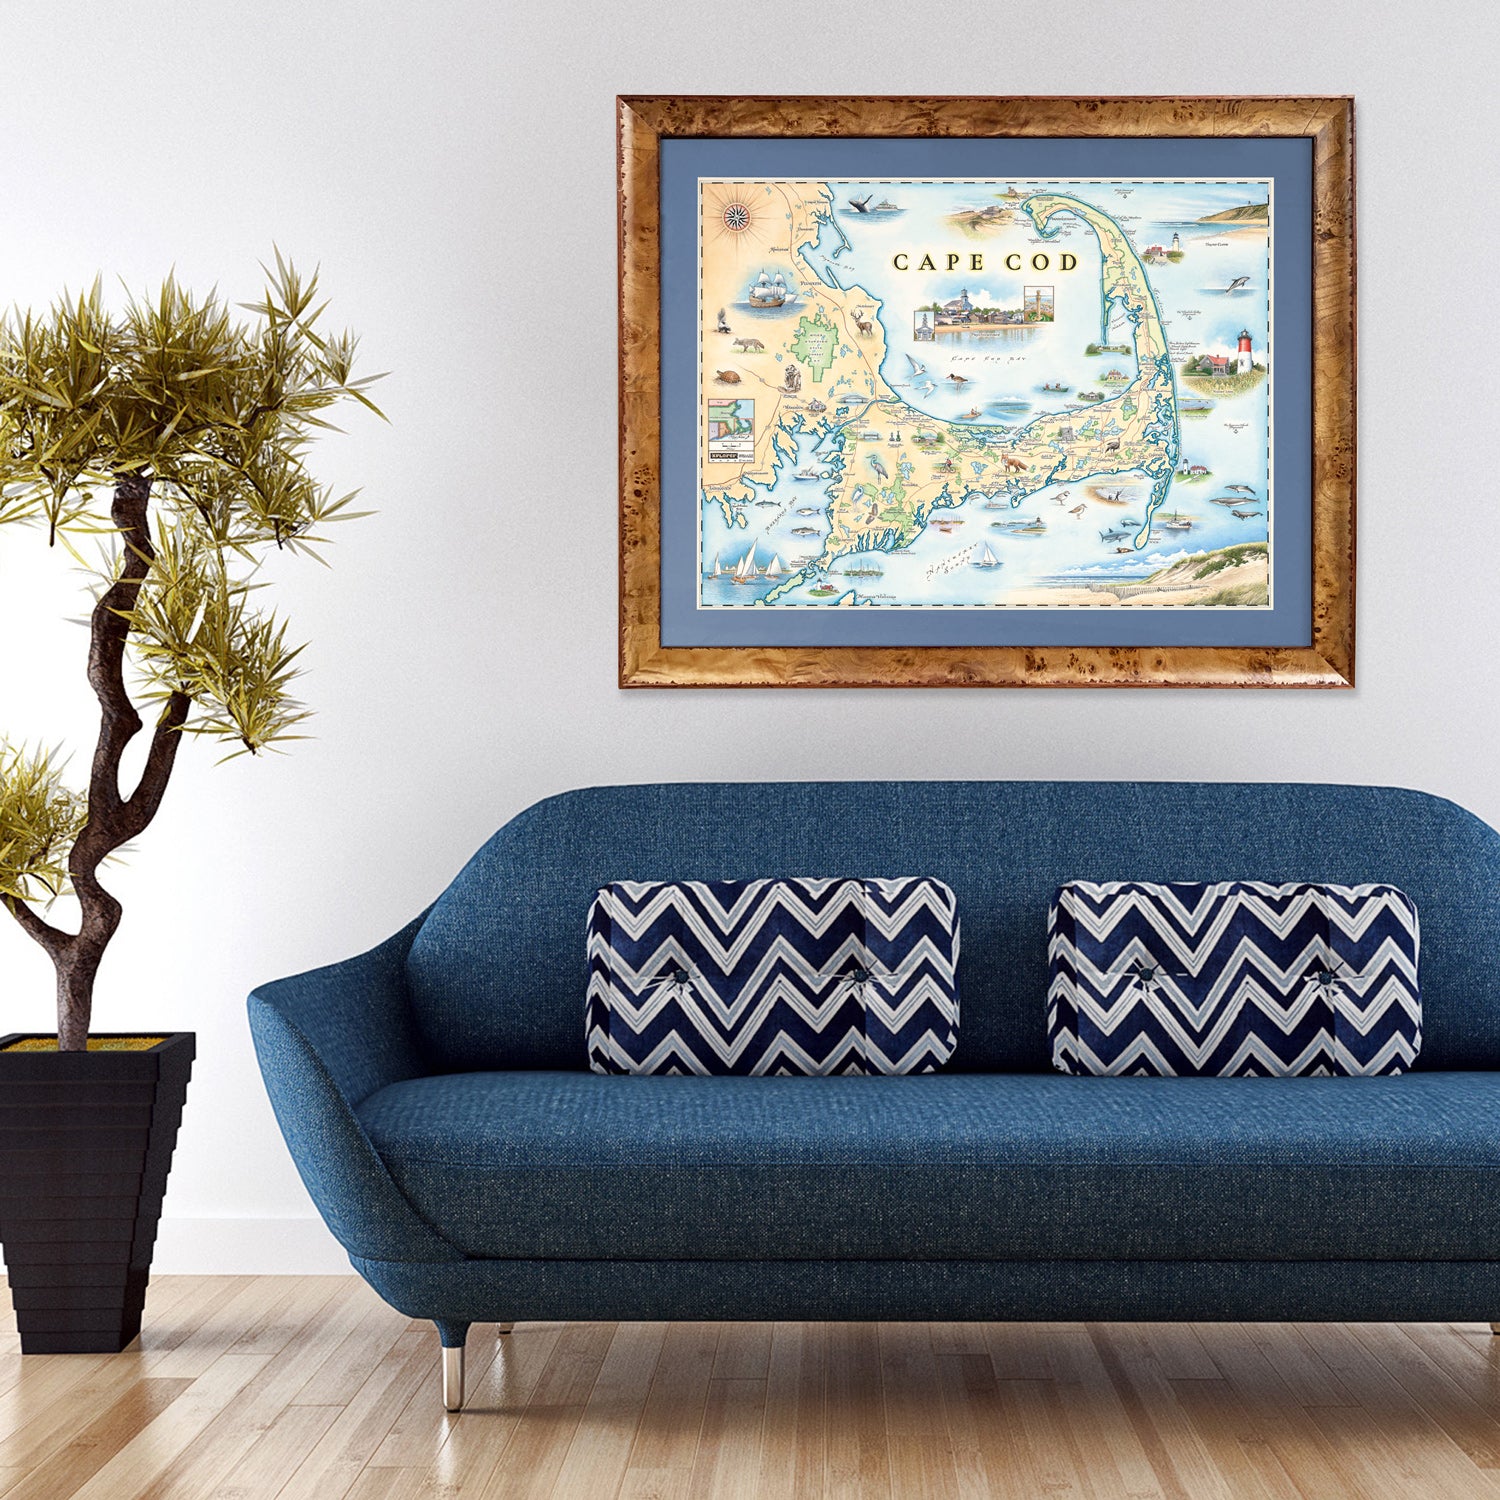 Massachusetts' Cape Cod Hand-Drawn Map hanging over a blue couch.  Featuring Plymouth Rock, fish, crane, fox, Provincetown, canoeing, biking, beach, and ocean.